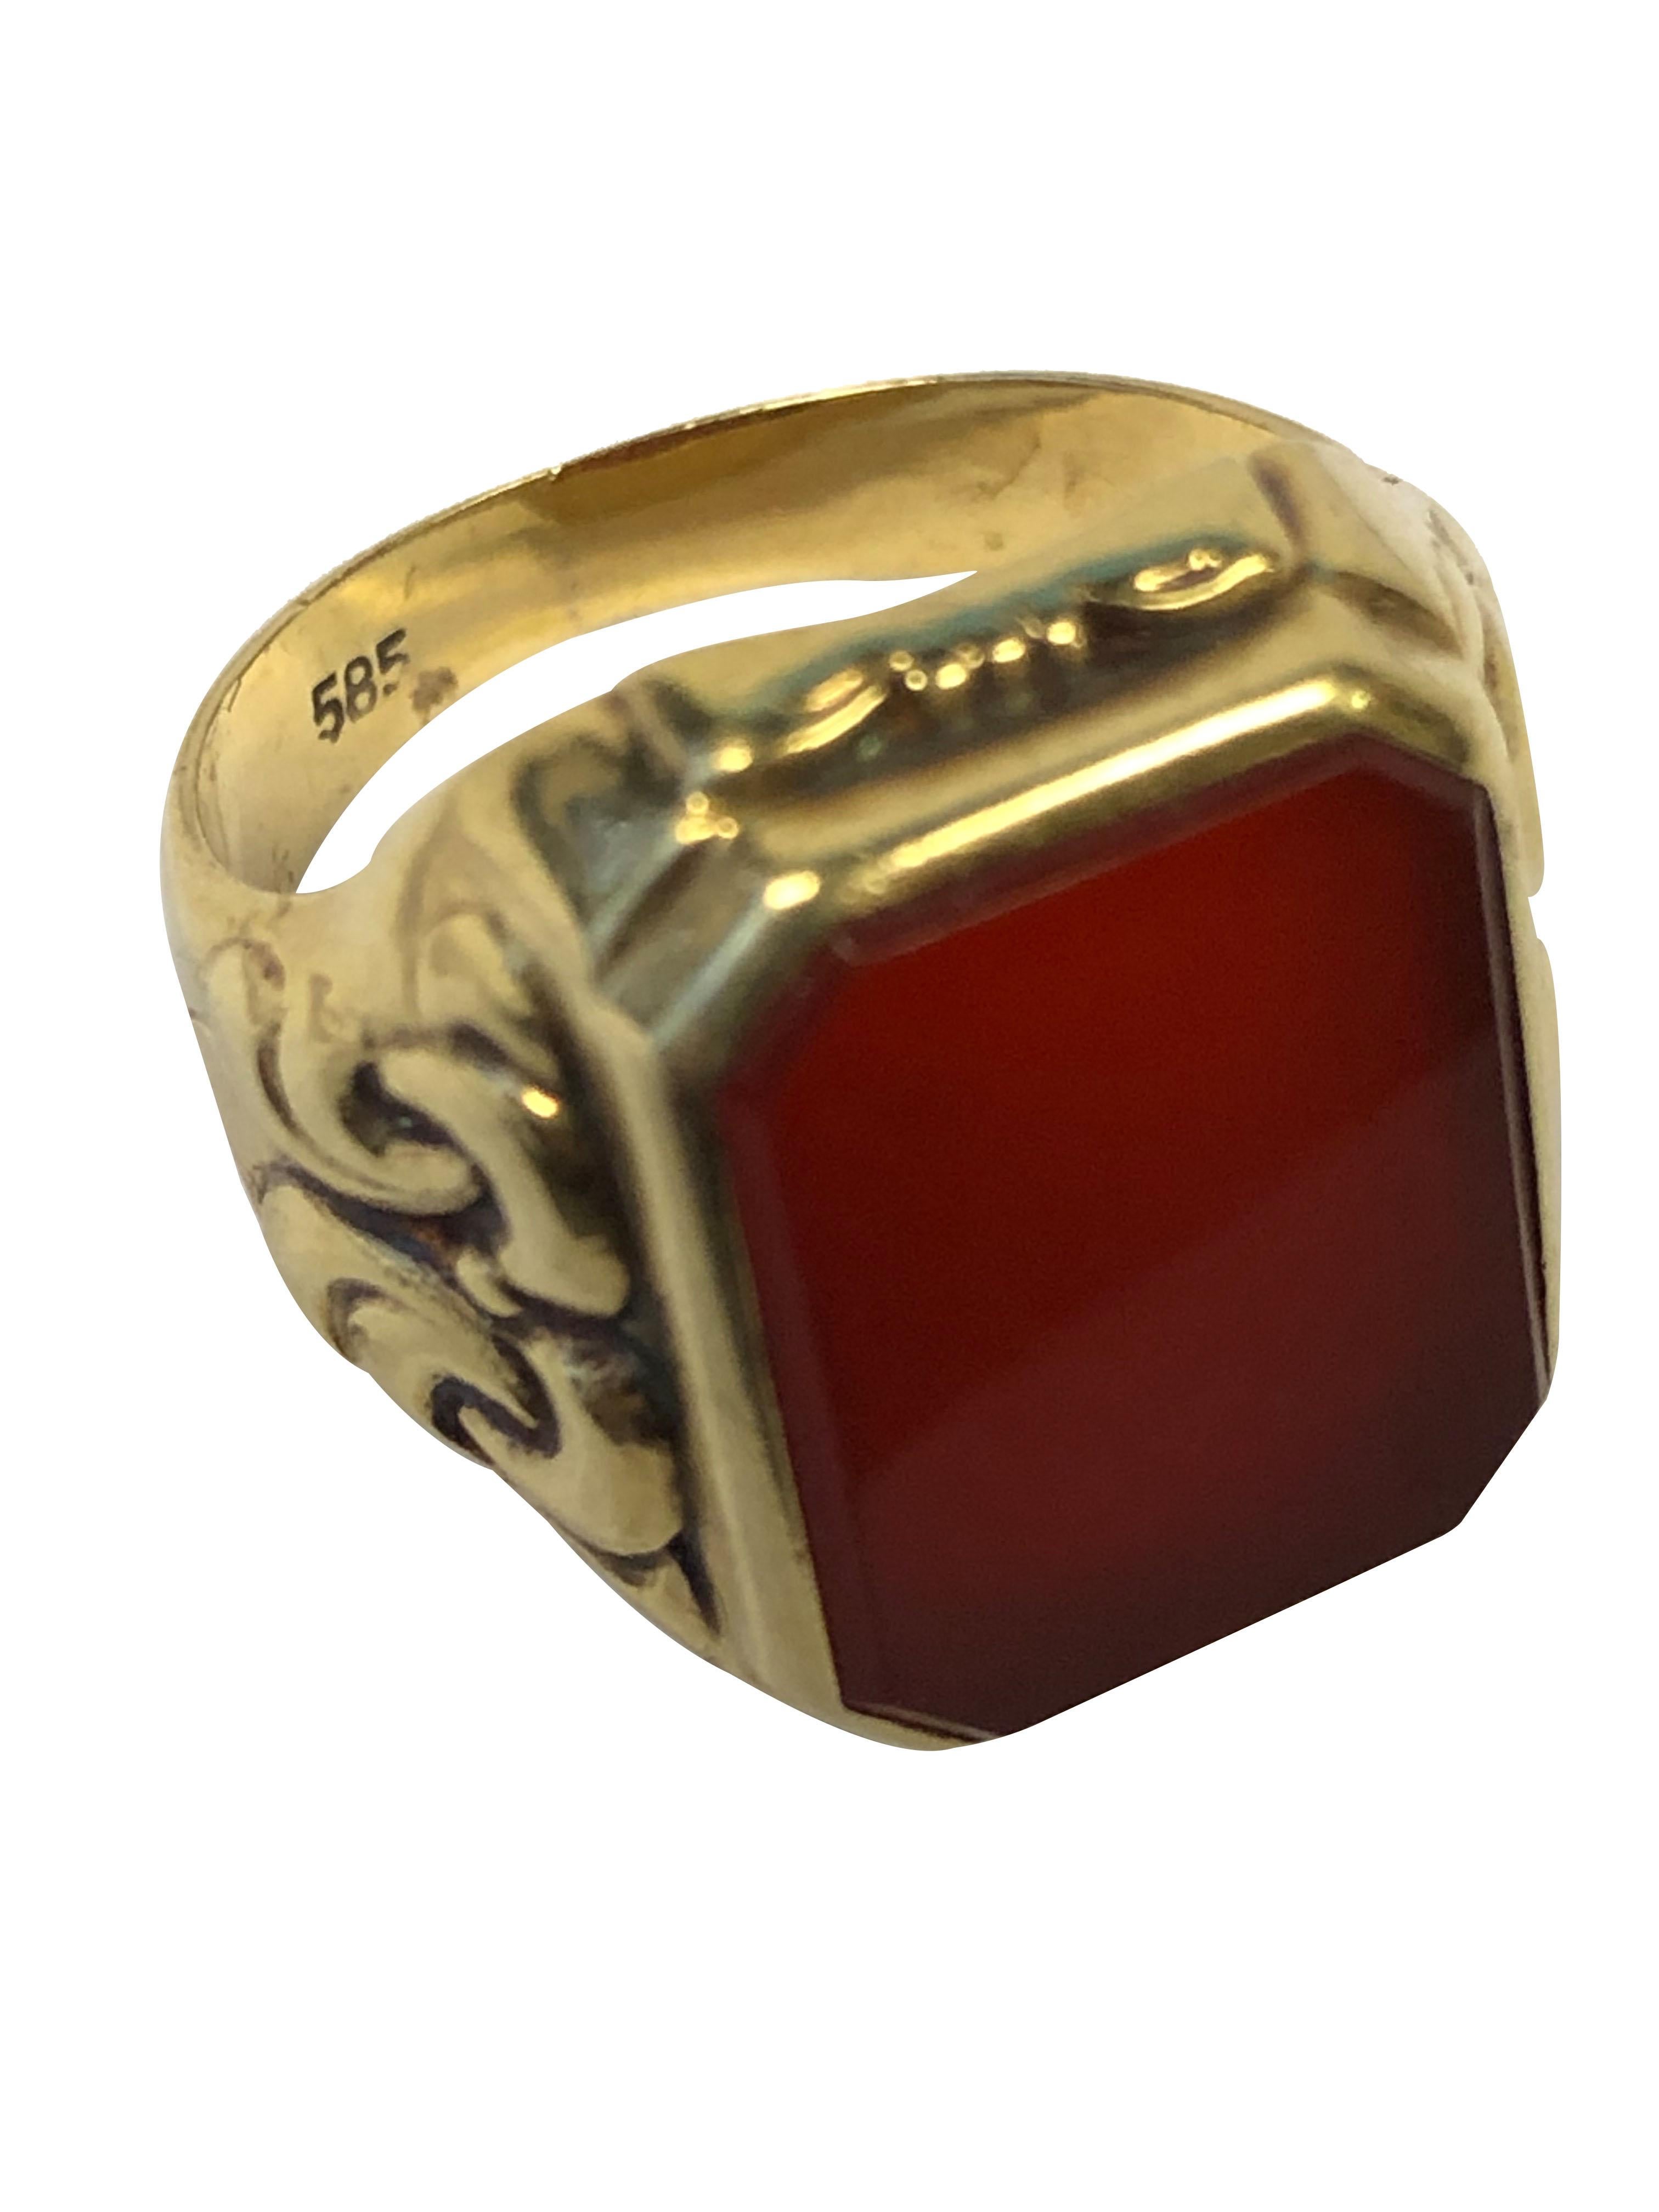 Antique Gold and Carnelian Edwardian Signet Ring  1